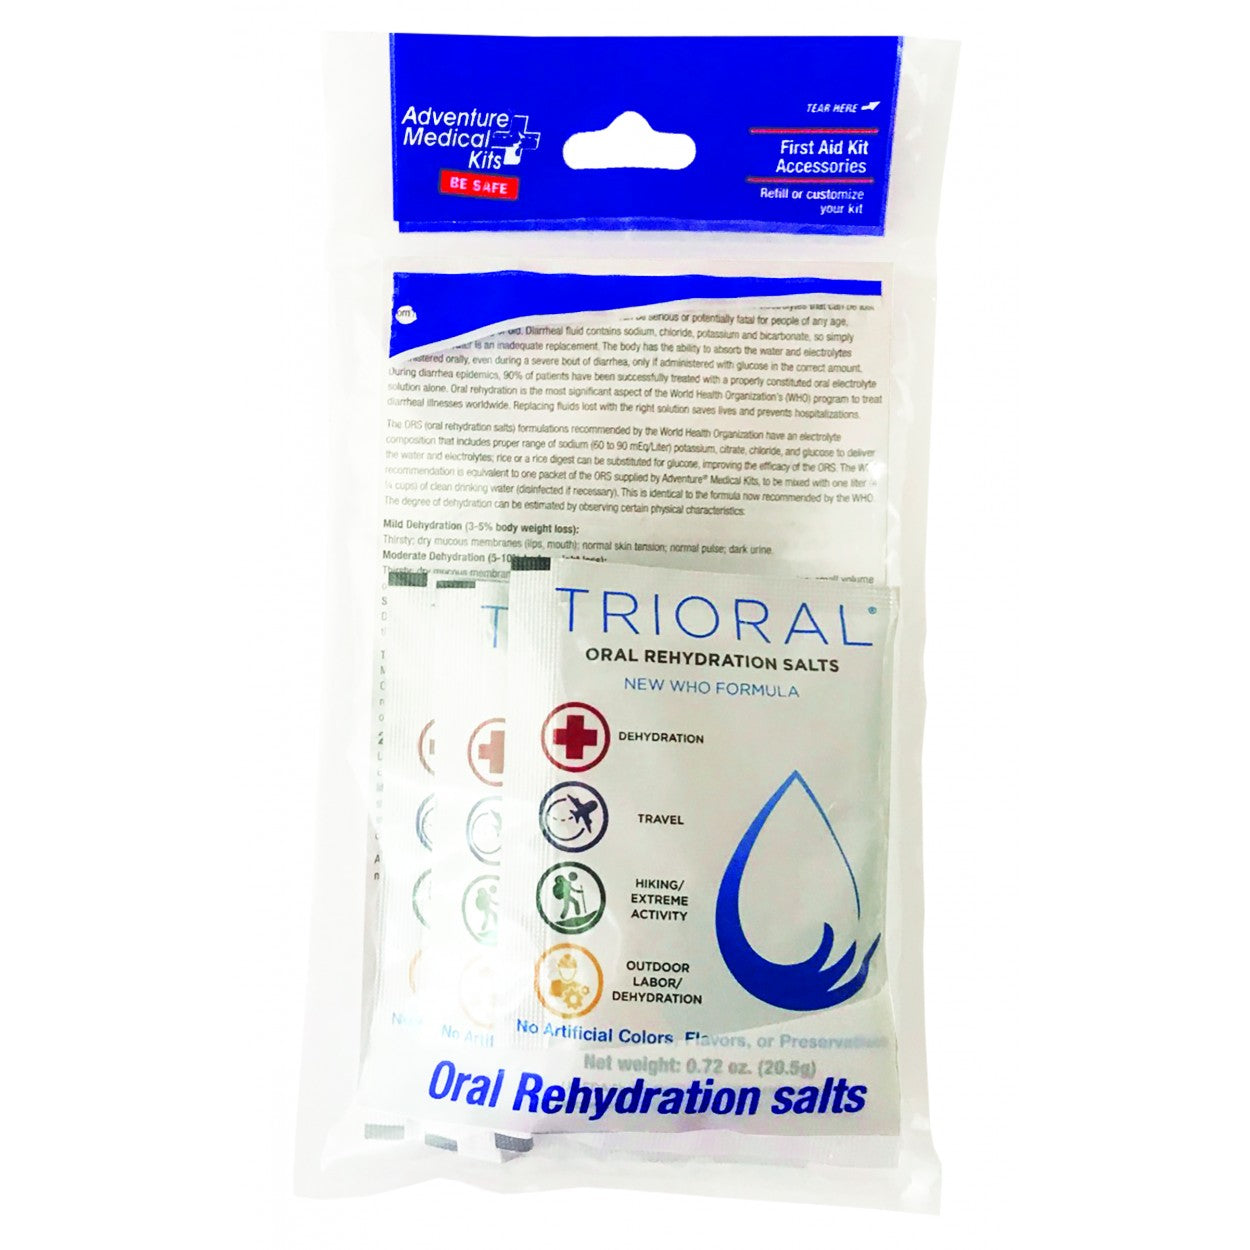 Adventure Medical Kits Oral Rehydration Salts 3-Pack